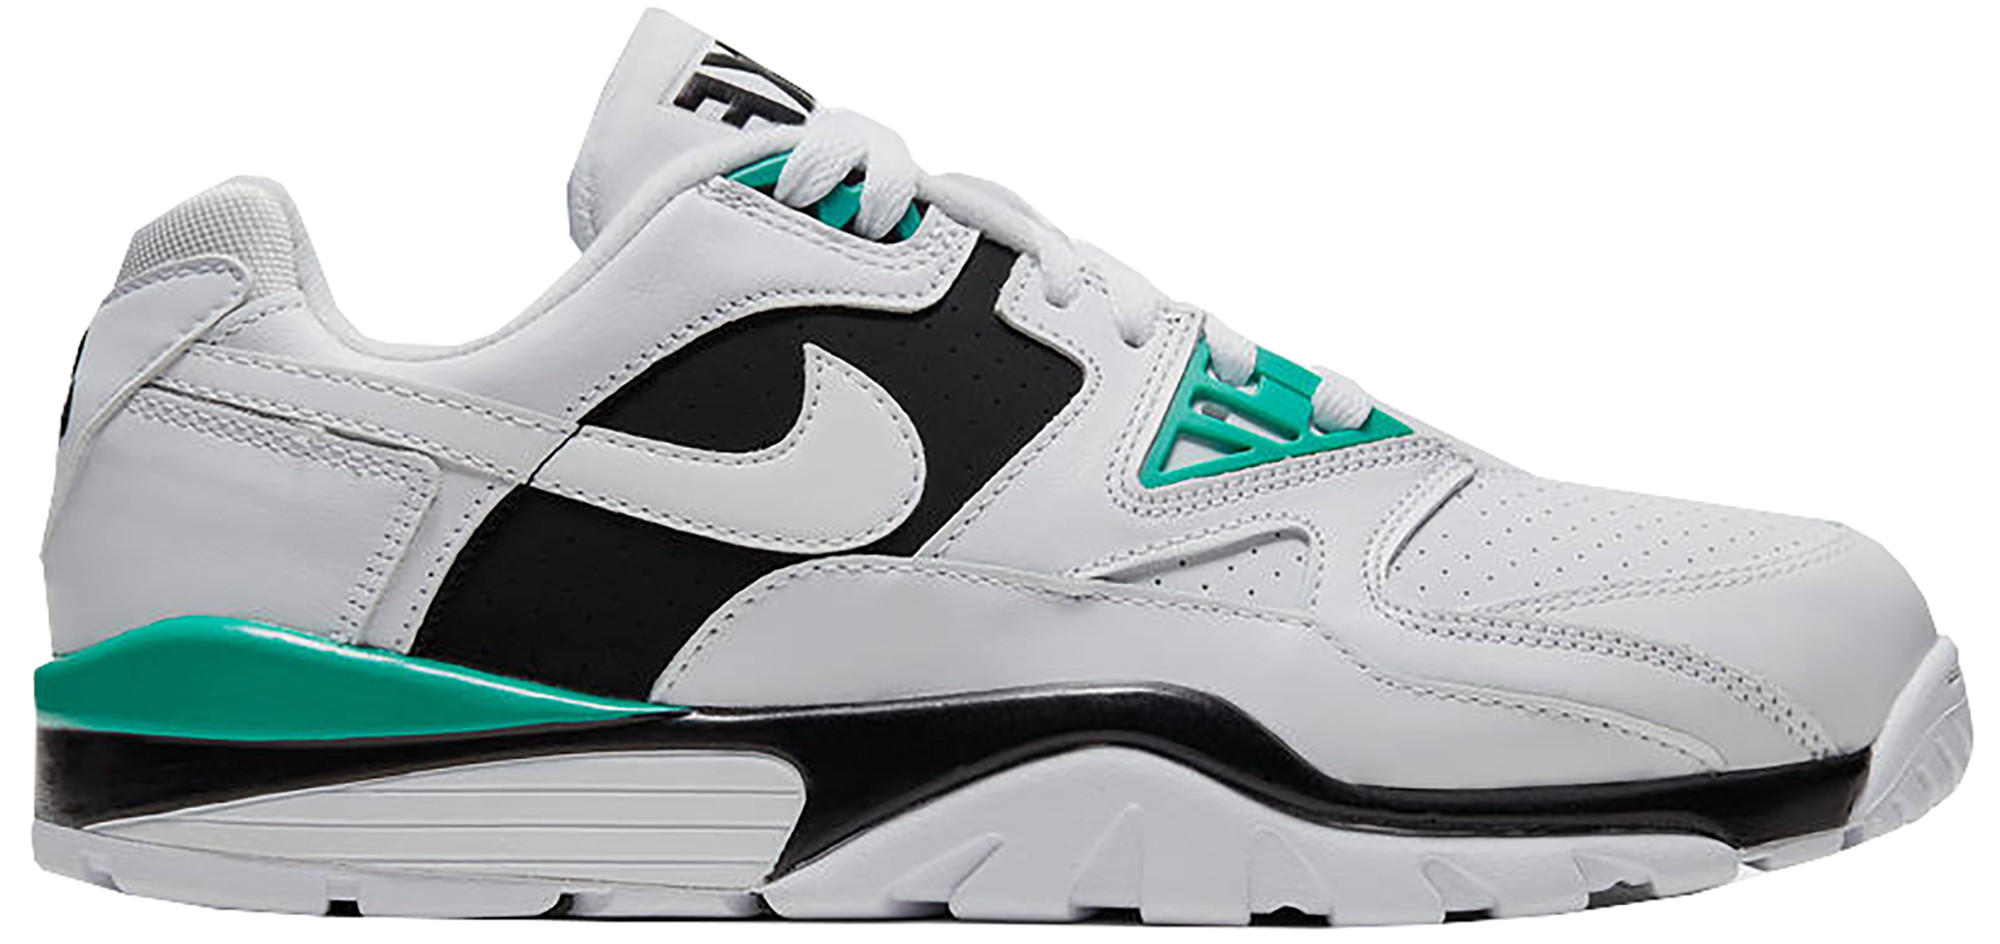 nike air trainer 3 stockx